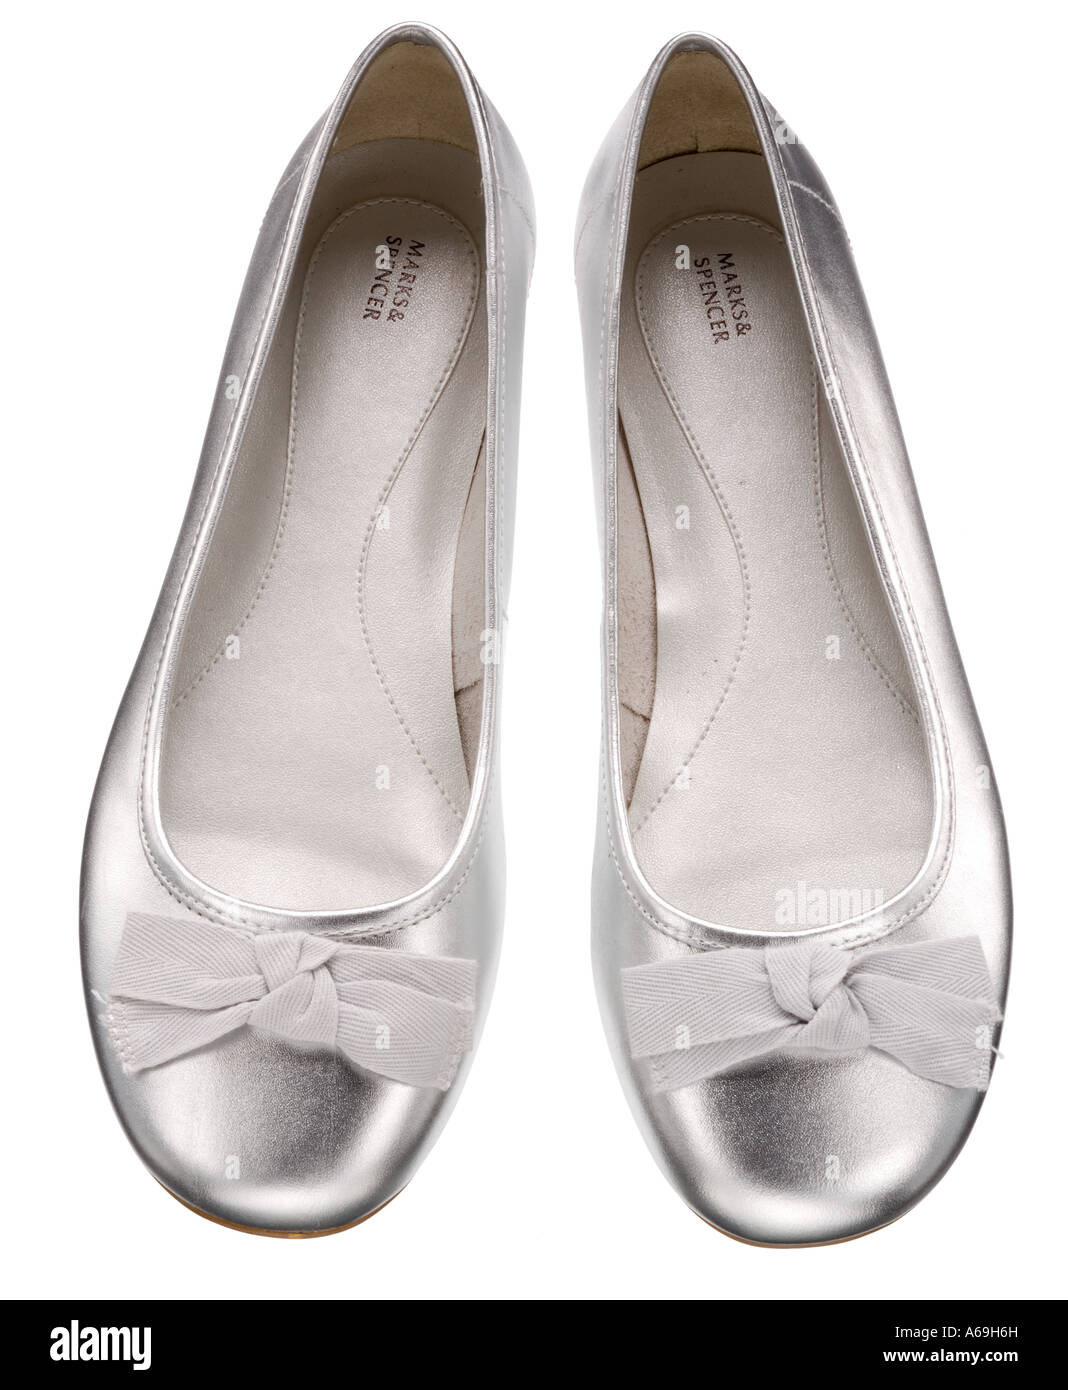 Silver ladies shoes Stock Photo